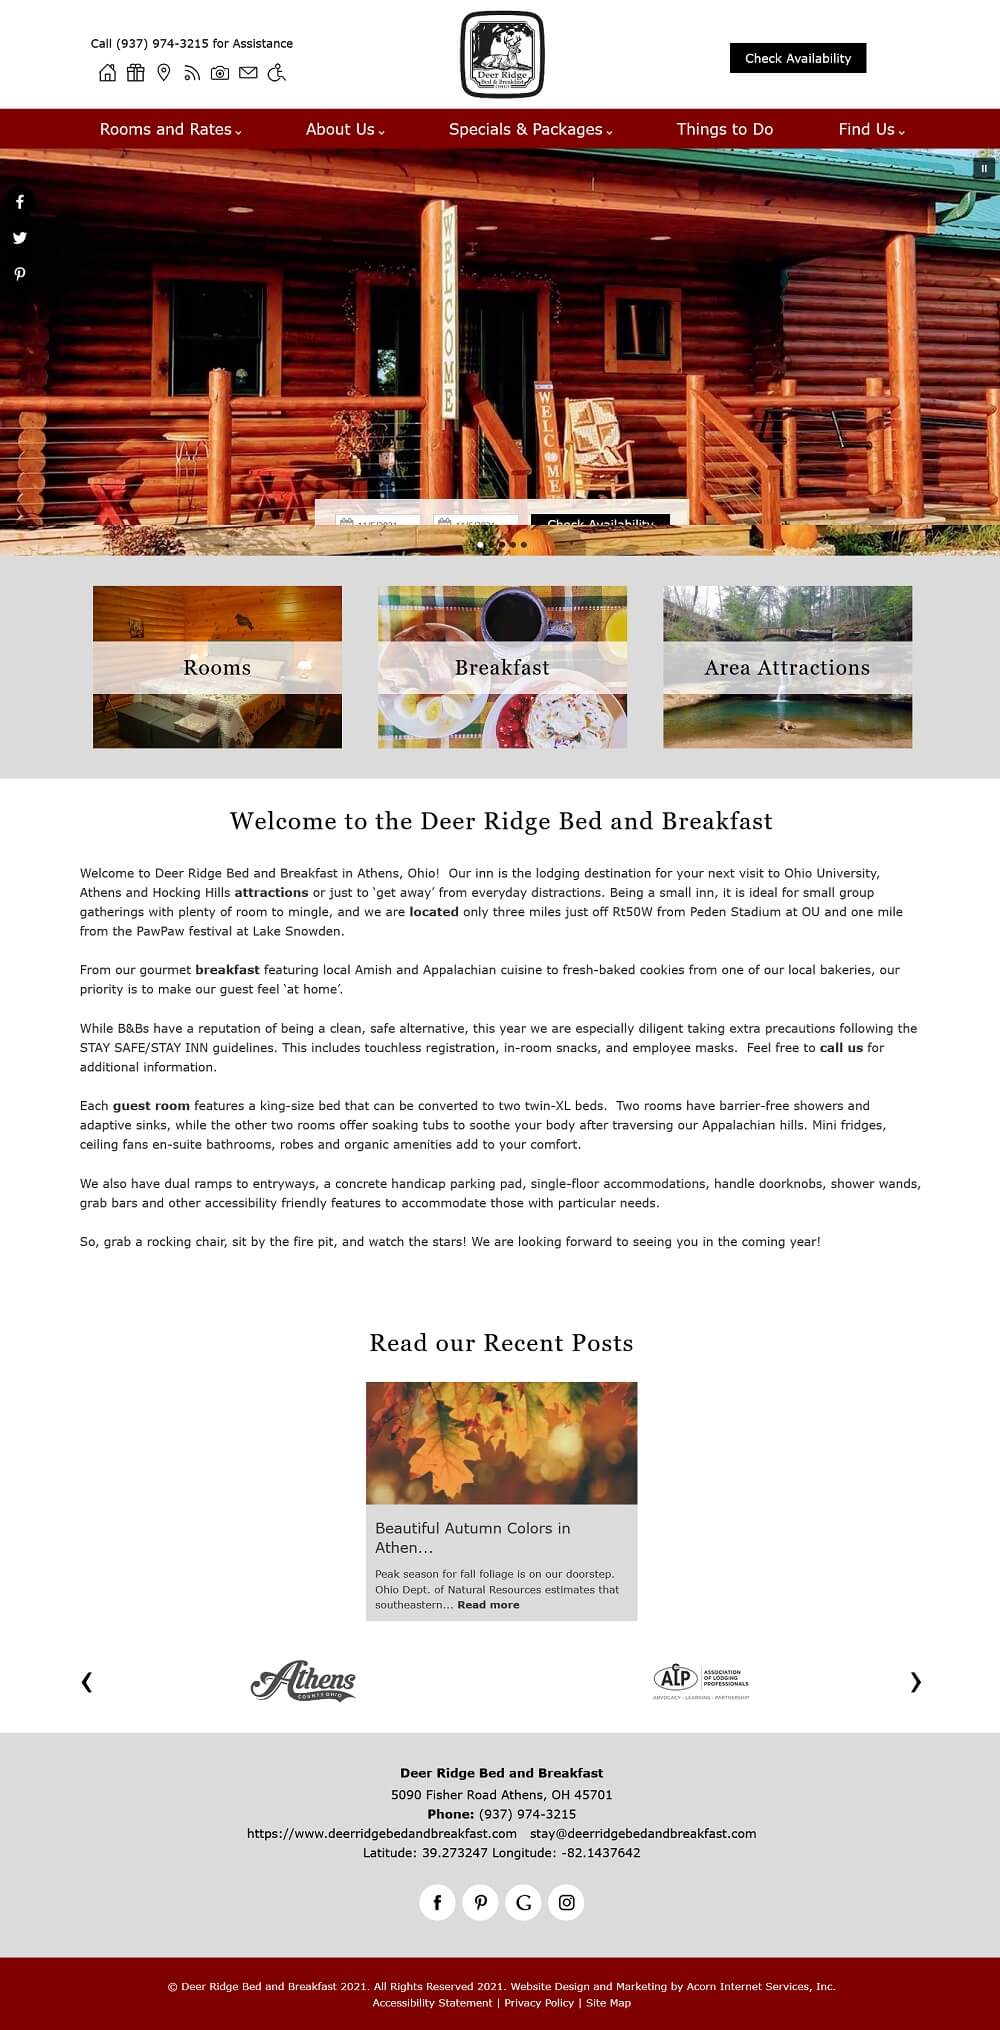 Standard Design Home Page for Deer Ridge Bed and Breakfast in Ohio